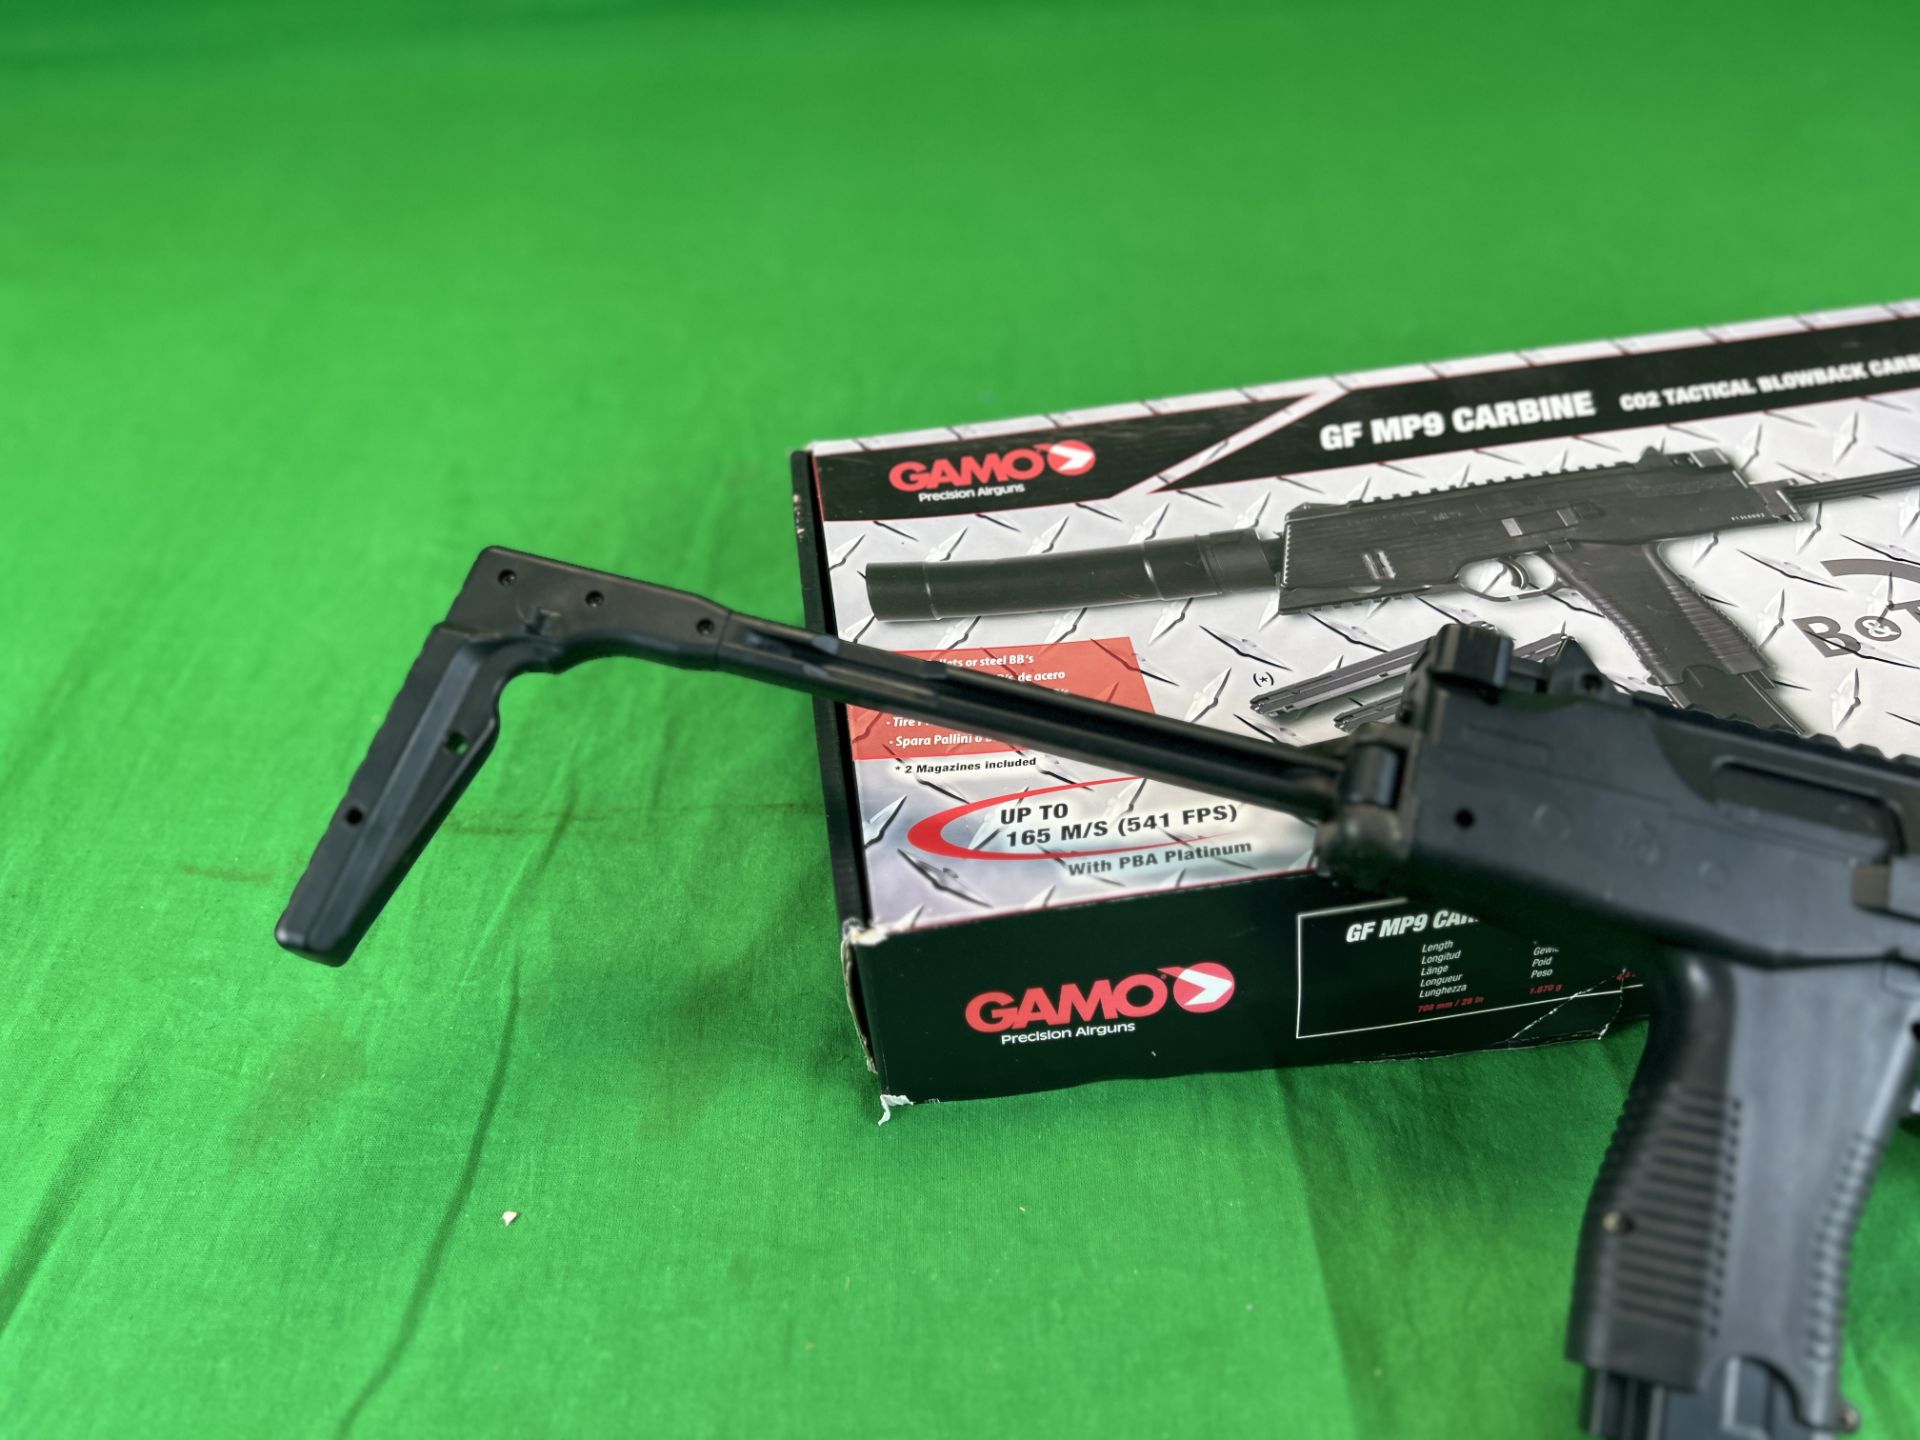 GAMO GF MP9 CARBINE Co2 TACTICAL BLOWBACK CARBINE PELLET AND BB RIFLE WITH ORIGINAL BOX - (ALL GUNS - Image 6 of 9